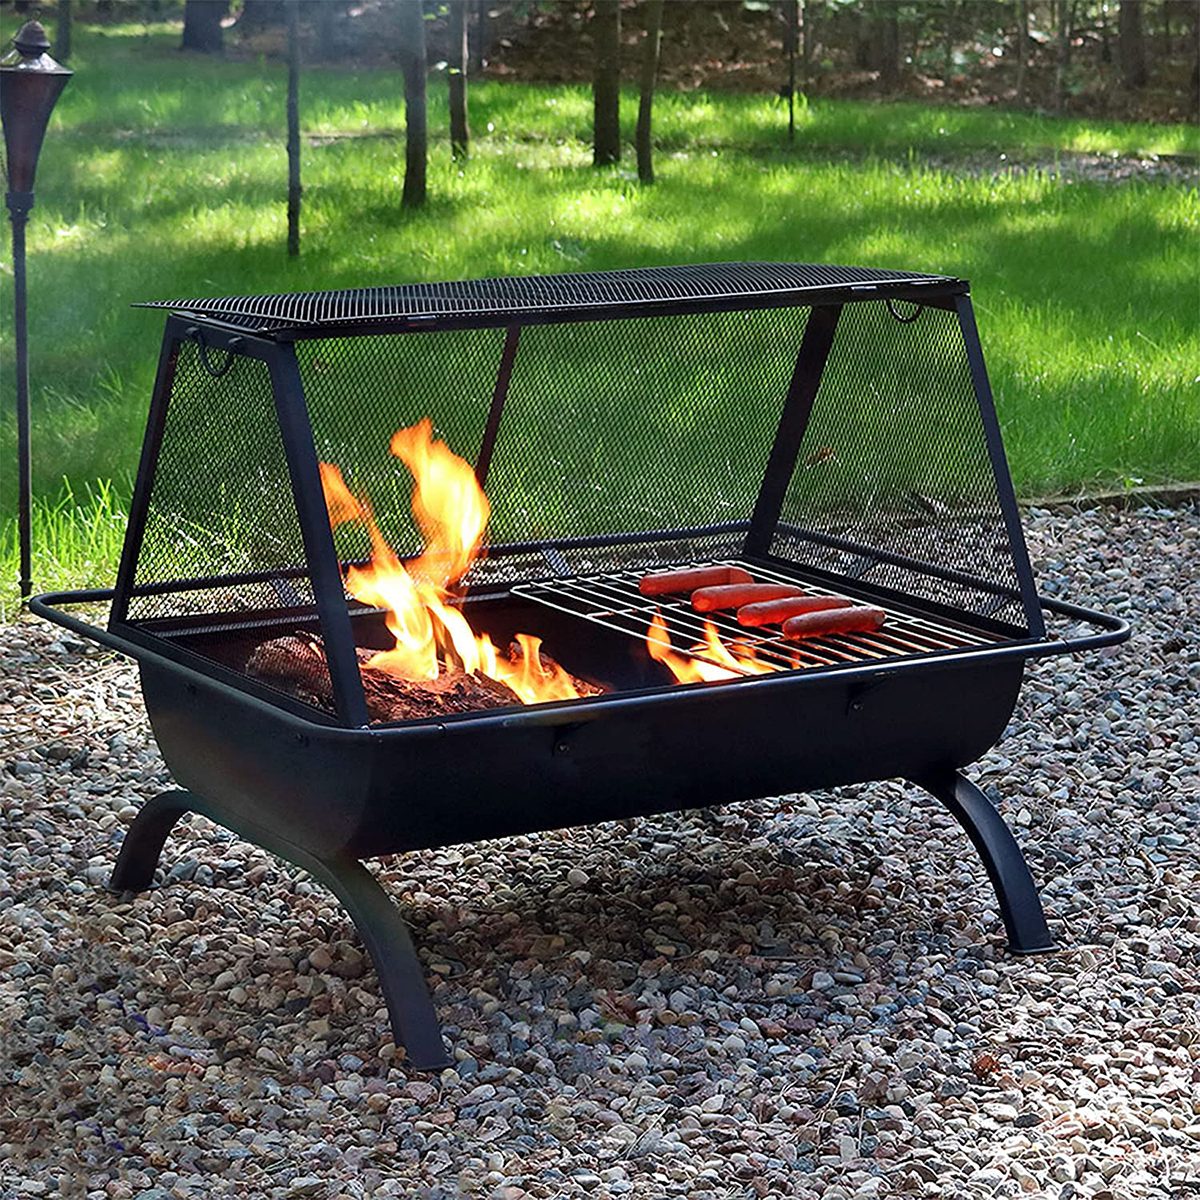 Top-Rated Wood-Burning, Propane Fire Pits on Amazon For Your Backyard